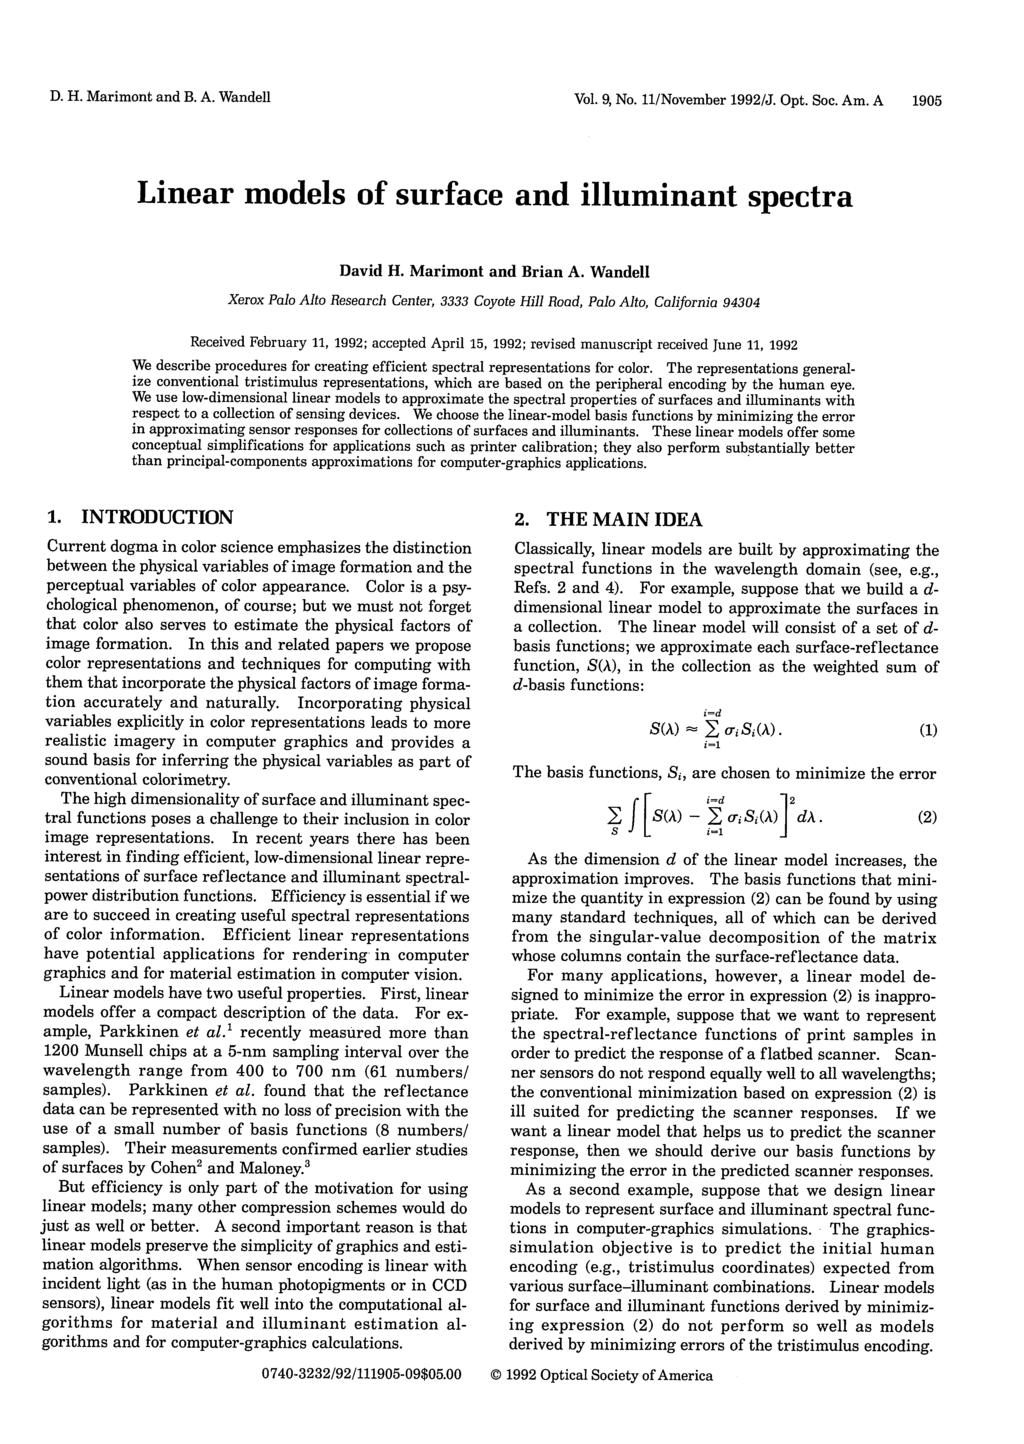 D. H. Marimont and B. A. Wandell Vol. 9, No. 11/November 1992/J. Opt. Soc. Am. A 1905 Linear models of surface and illuminant spectra David H. Marimont and Brian A.